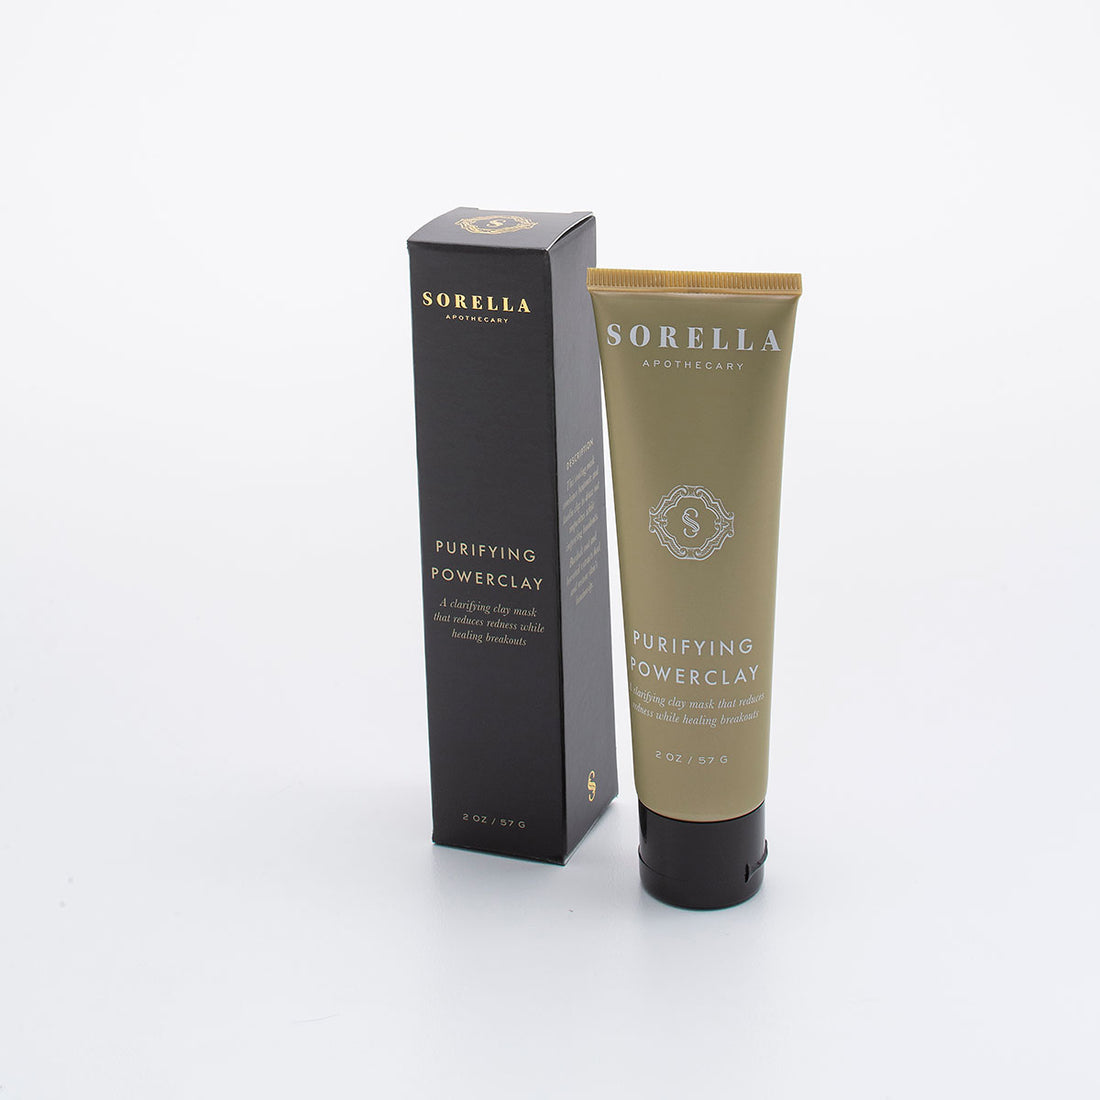 Sorella Apothecary Purifying Powerclay Mask is great for acne prone skin and Rosacea.